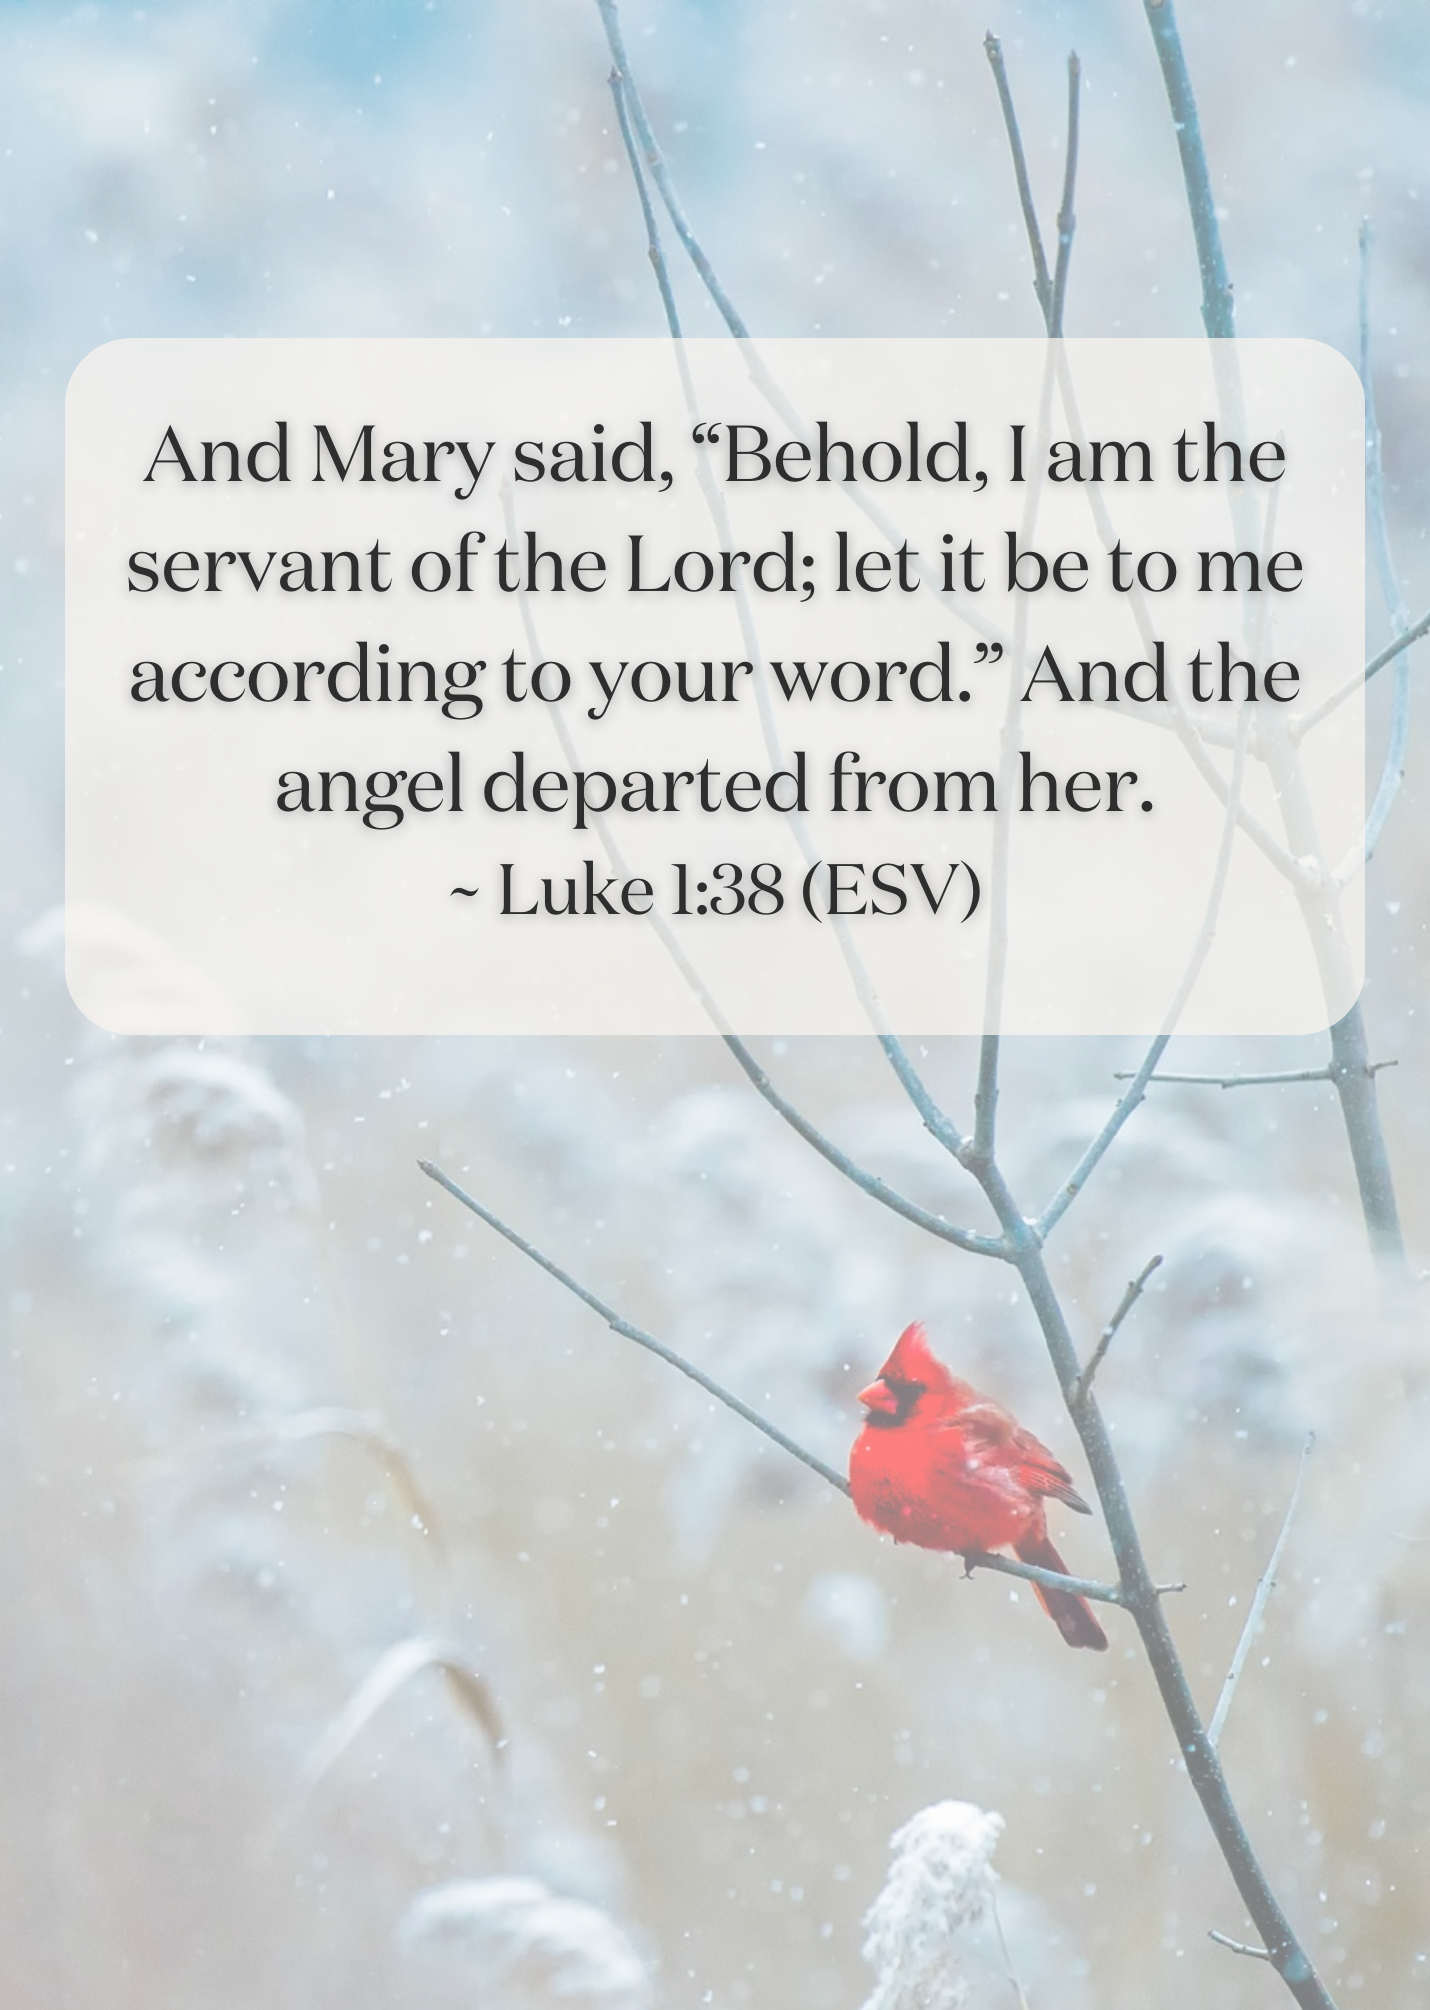 And Mary said, “Behold, I am the servant of the Lord; let it be to me according to your word.” And the angel departed from her. ~ Luke 1:38 (ESV)